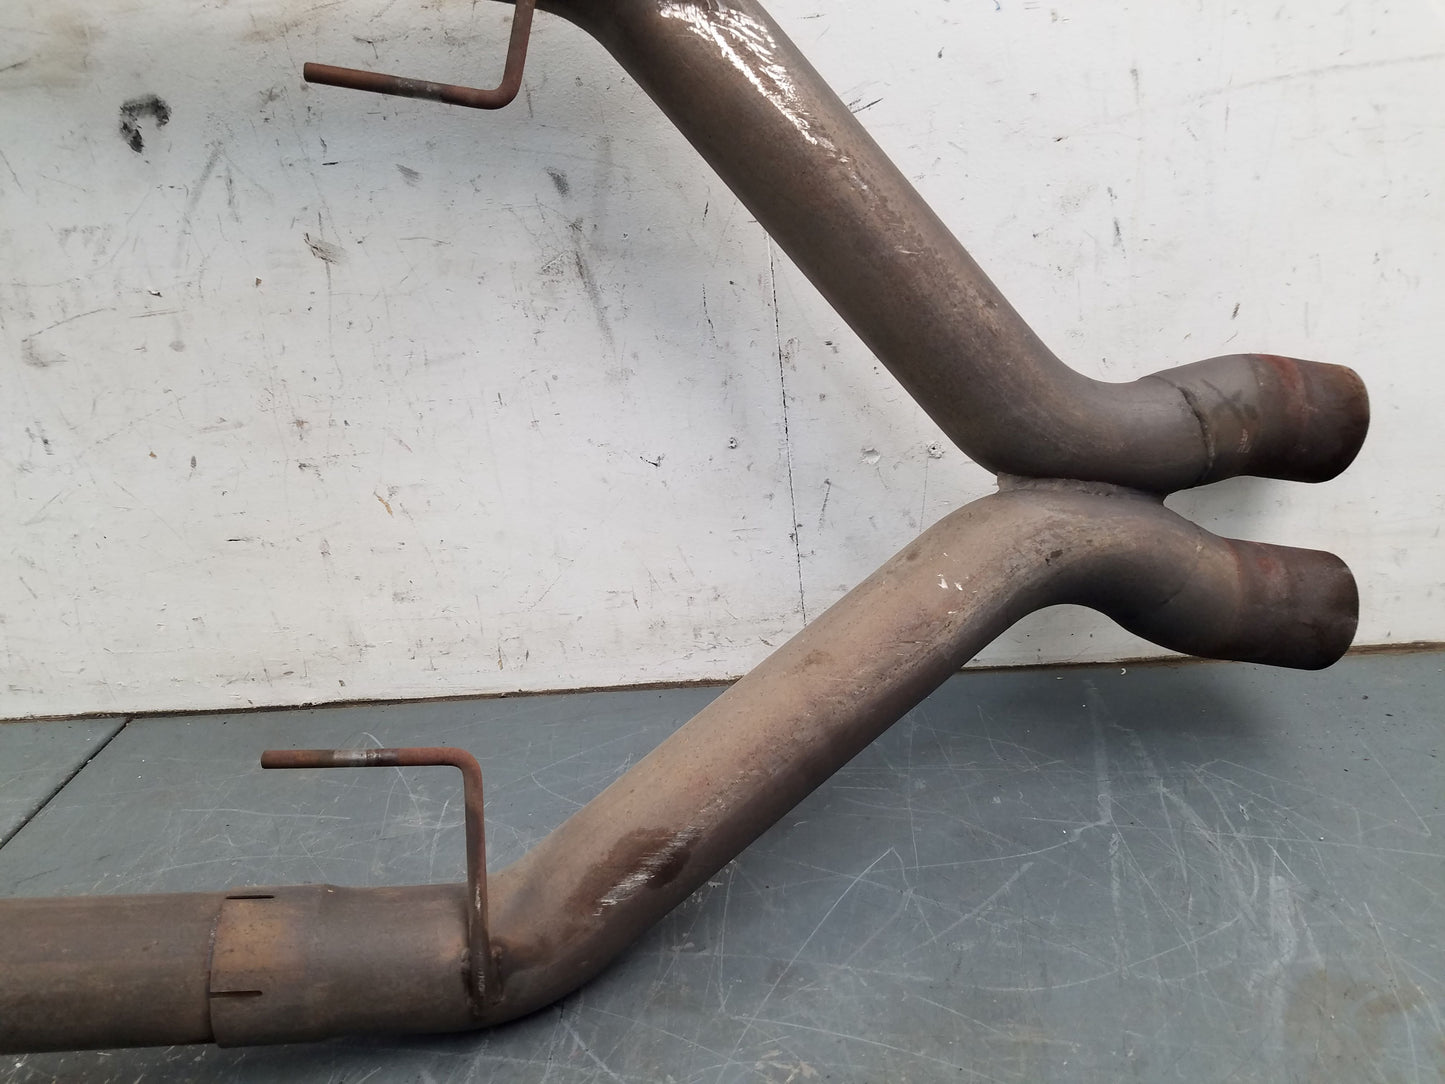 2007 Ford Mustang Shelby GT500 CATless Downpipes / X Pipe #8204 V7